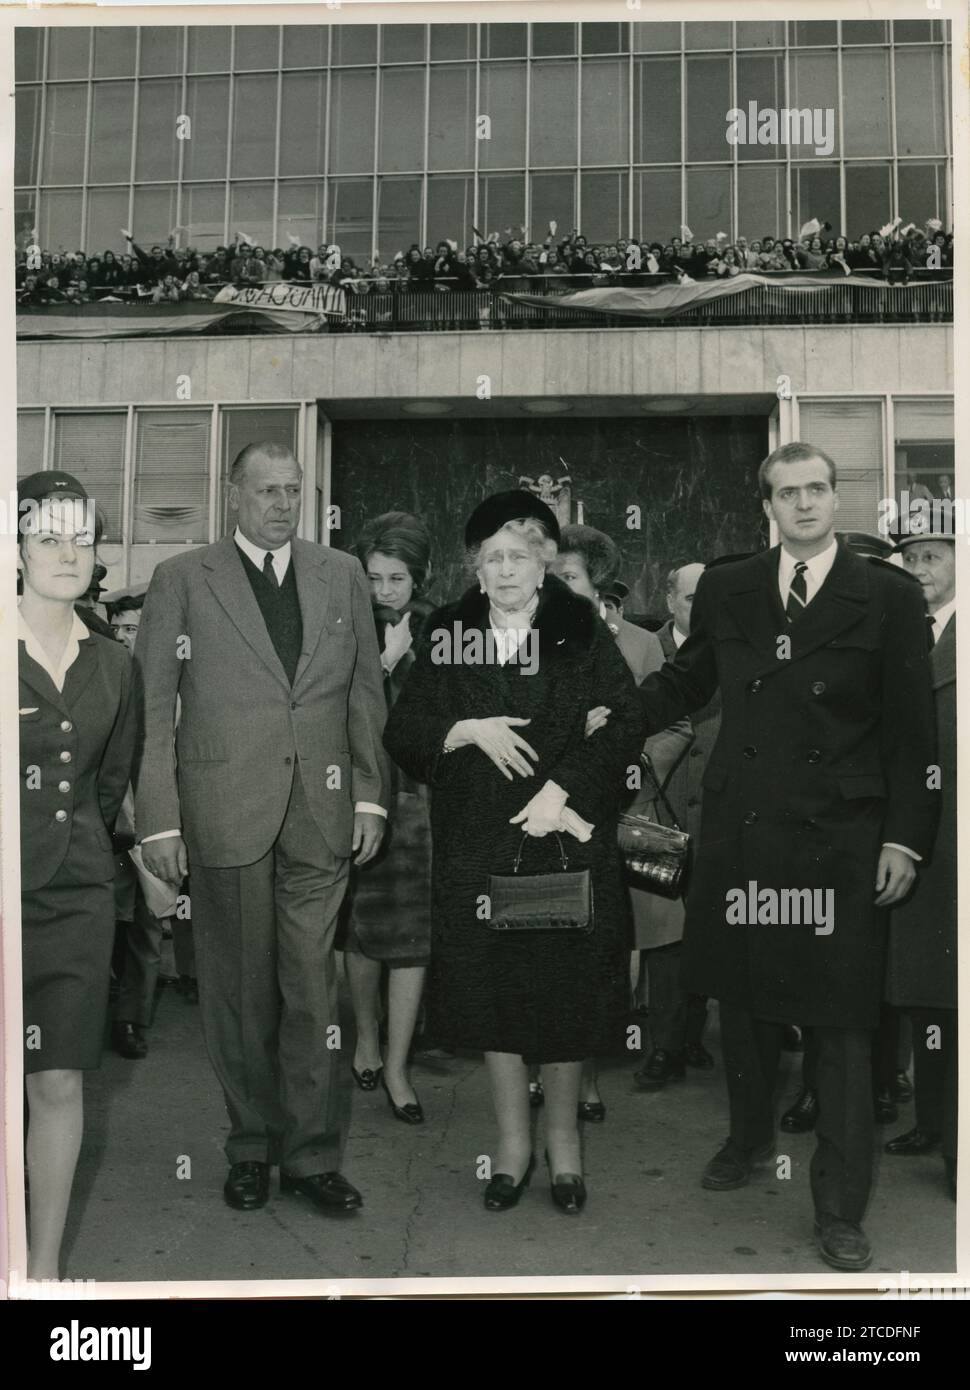 Madrid, 02/11/1968. Queen Victoria Eugenia visits Madrid on the occasion of the birth of her great-grandson, the Infante Don Felipe. In the image, farewell at Barajas Airport. With her, her son, Don Juan de Borbón, and her grandson, Prince Juan Carlos. Credit: Album / Archivo ABC / Teodoro Naranjo Domínguez Stock Photo